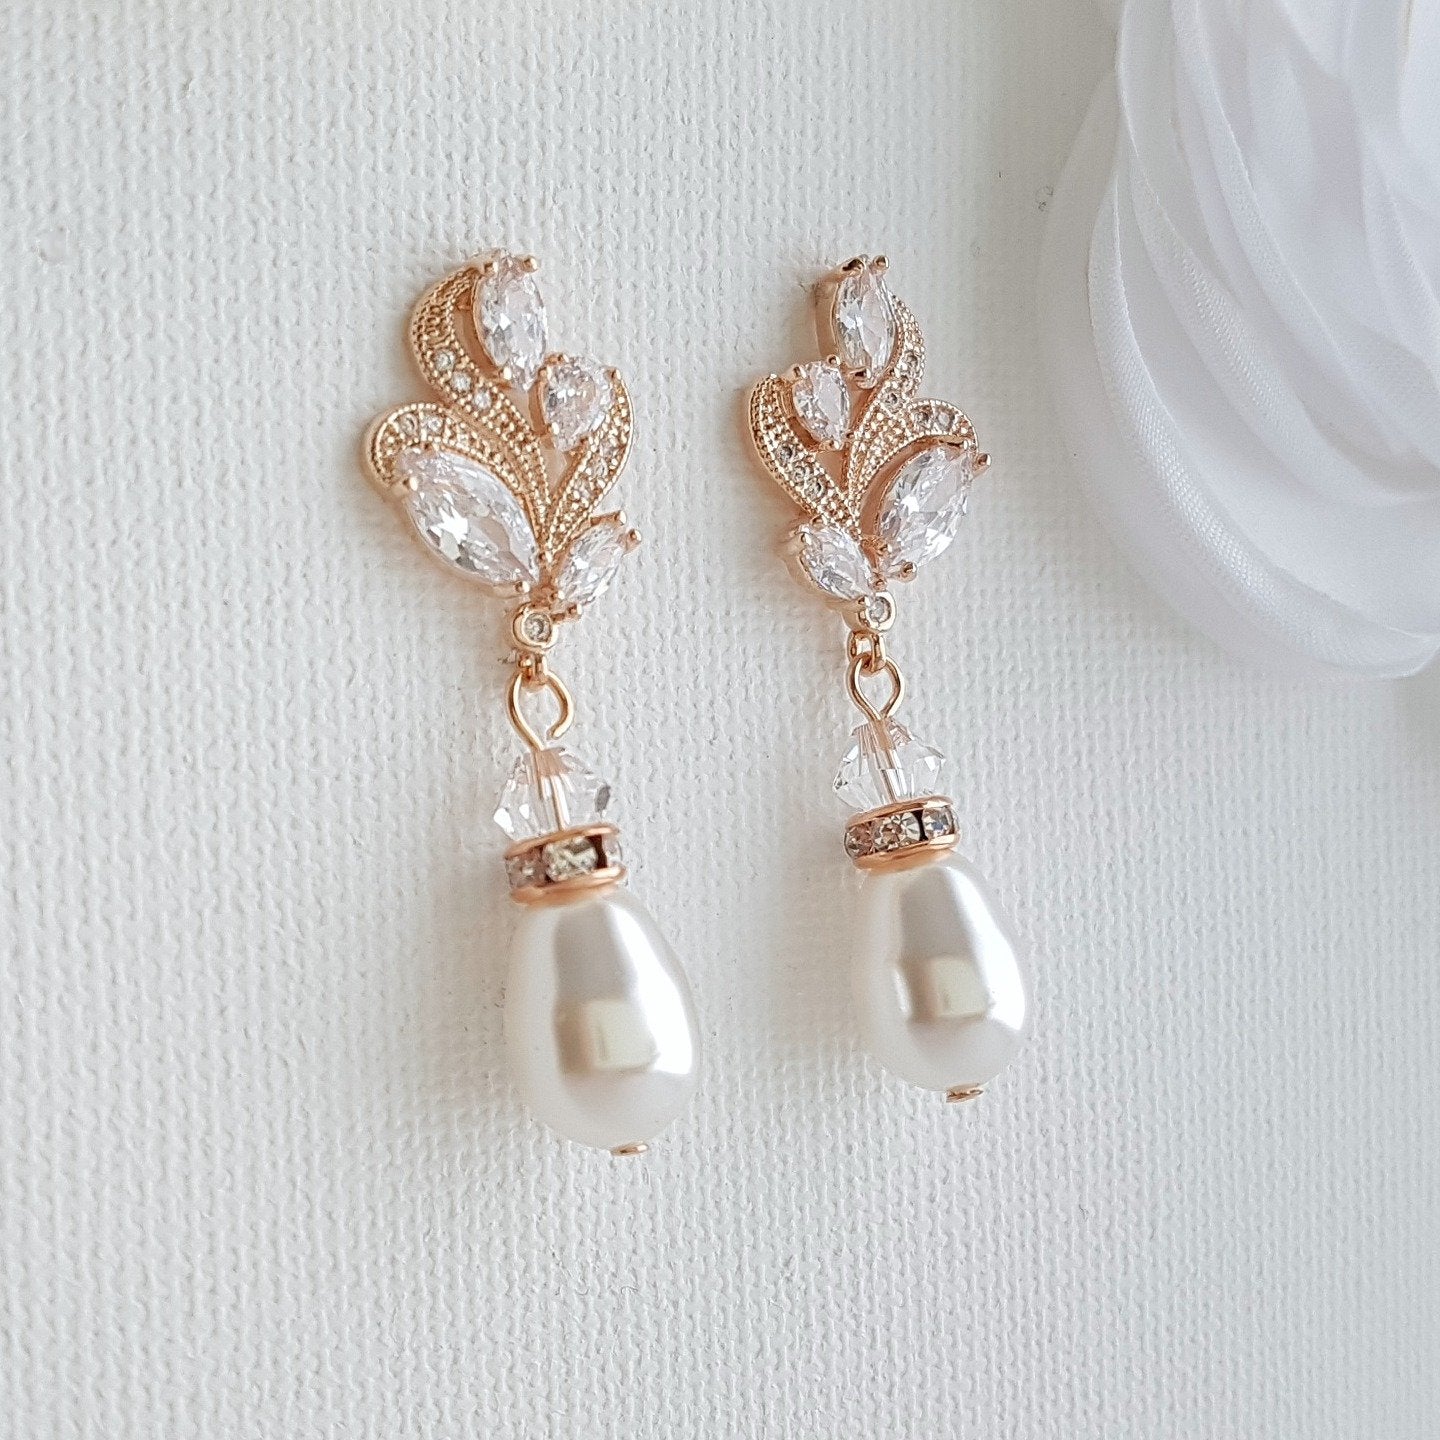 Gold Bridal Earrings With Pearl Drops-Wavy - PoetryDesigns